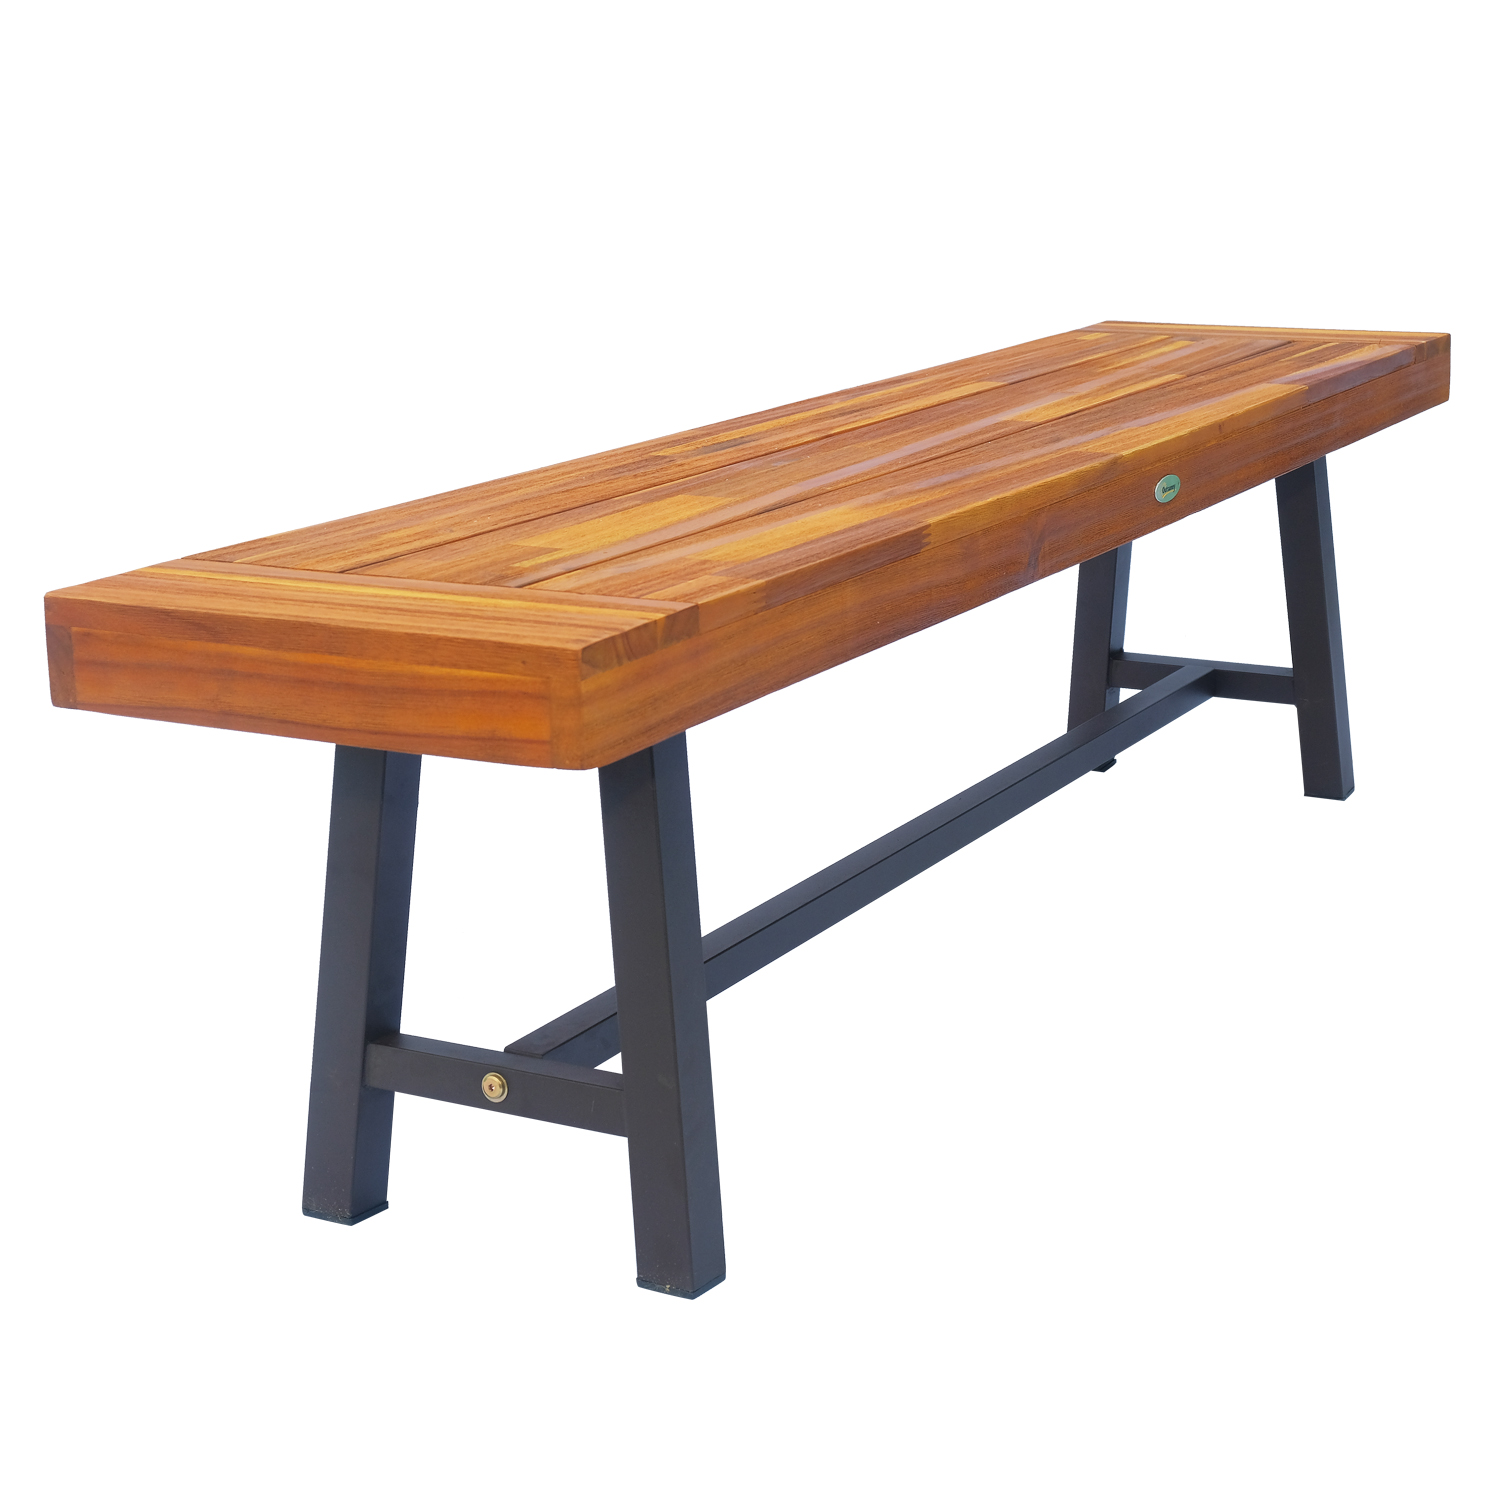 Outsunny 71'' Rustic Acacia Wood Outdoor Picnic Table and 63" Bench Seat Set - Natural Red Wood - image 3 of 6